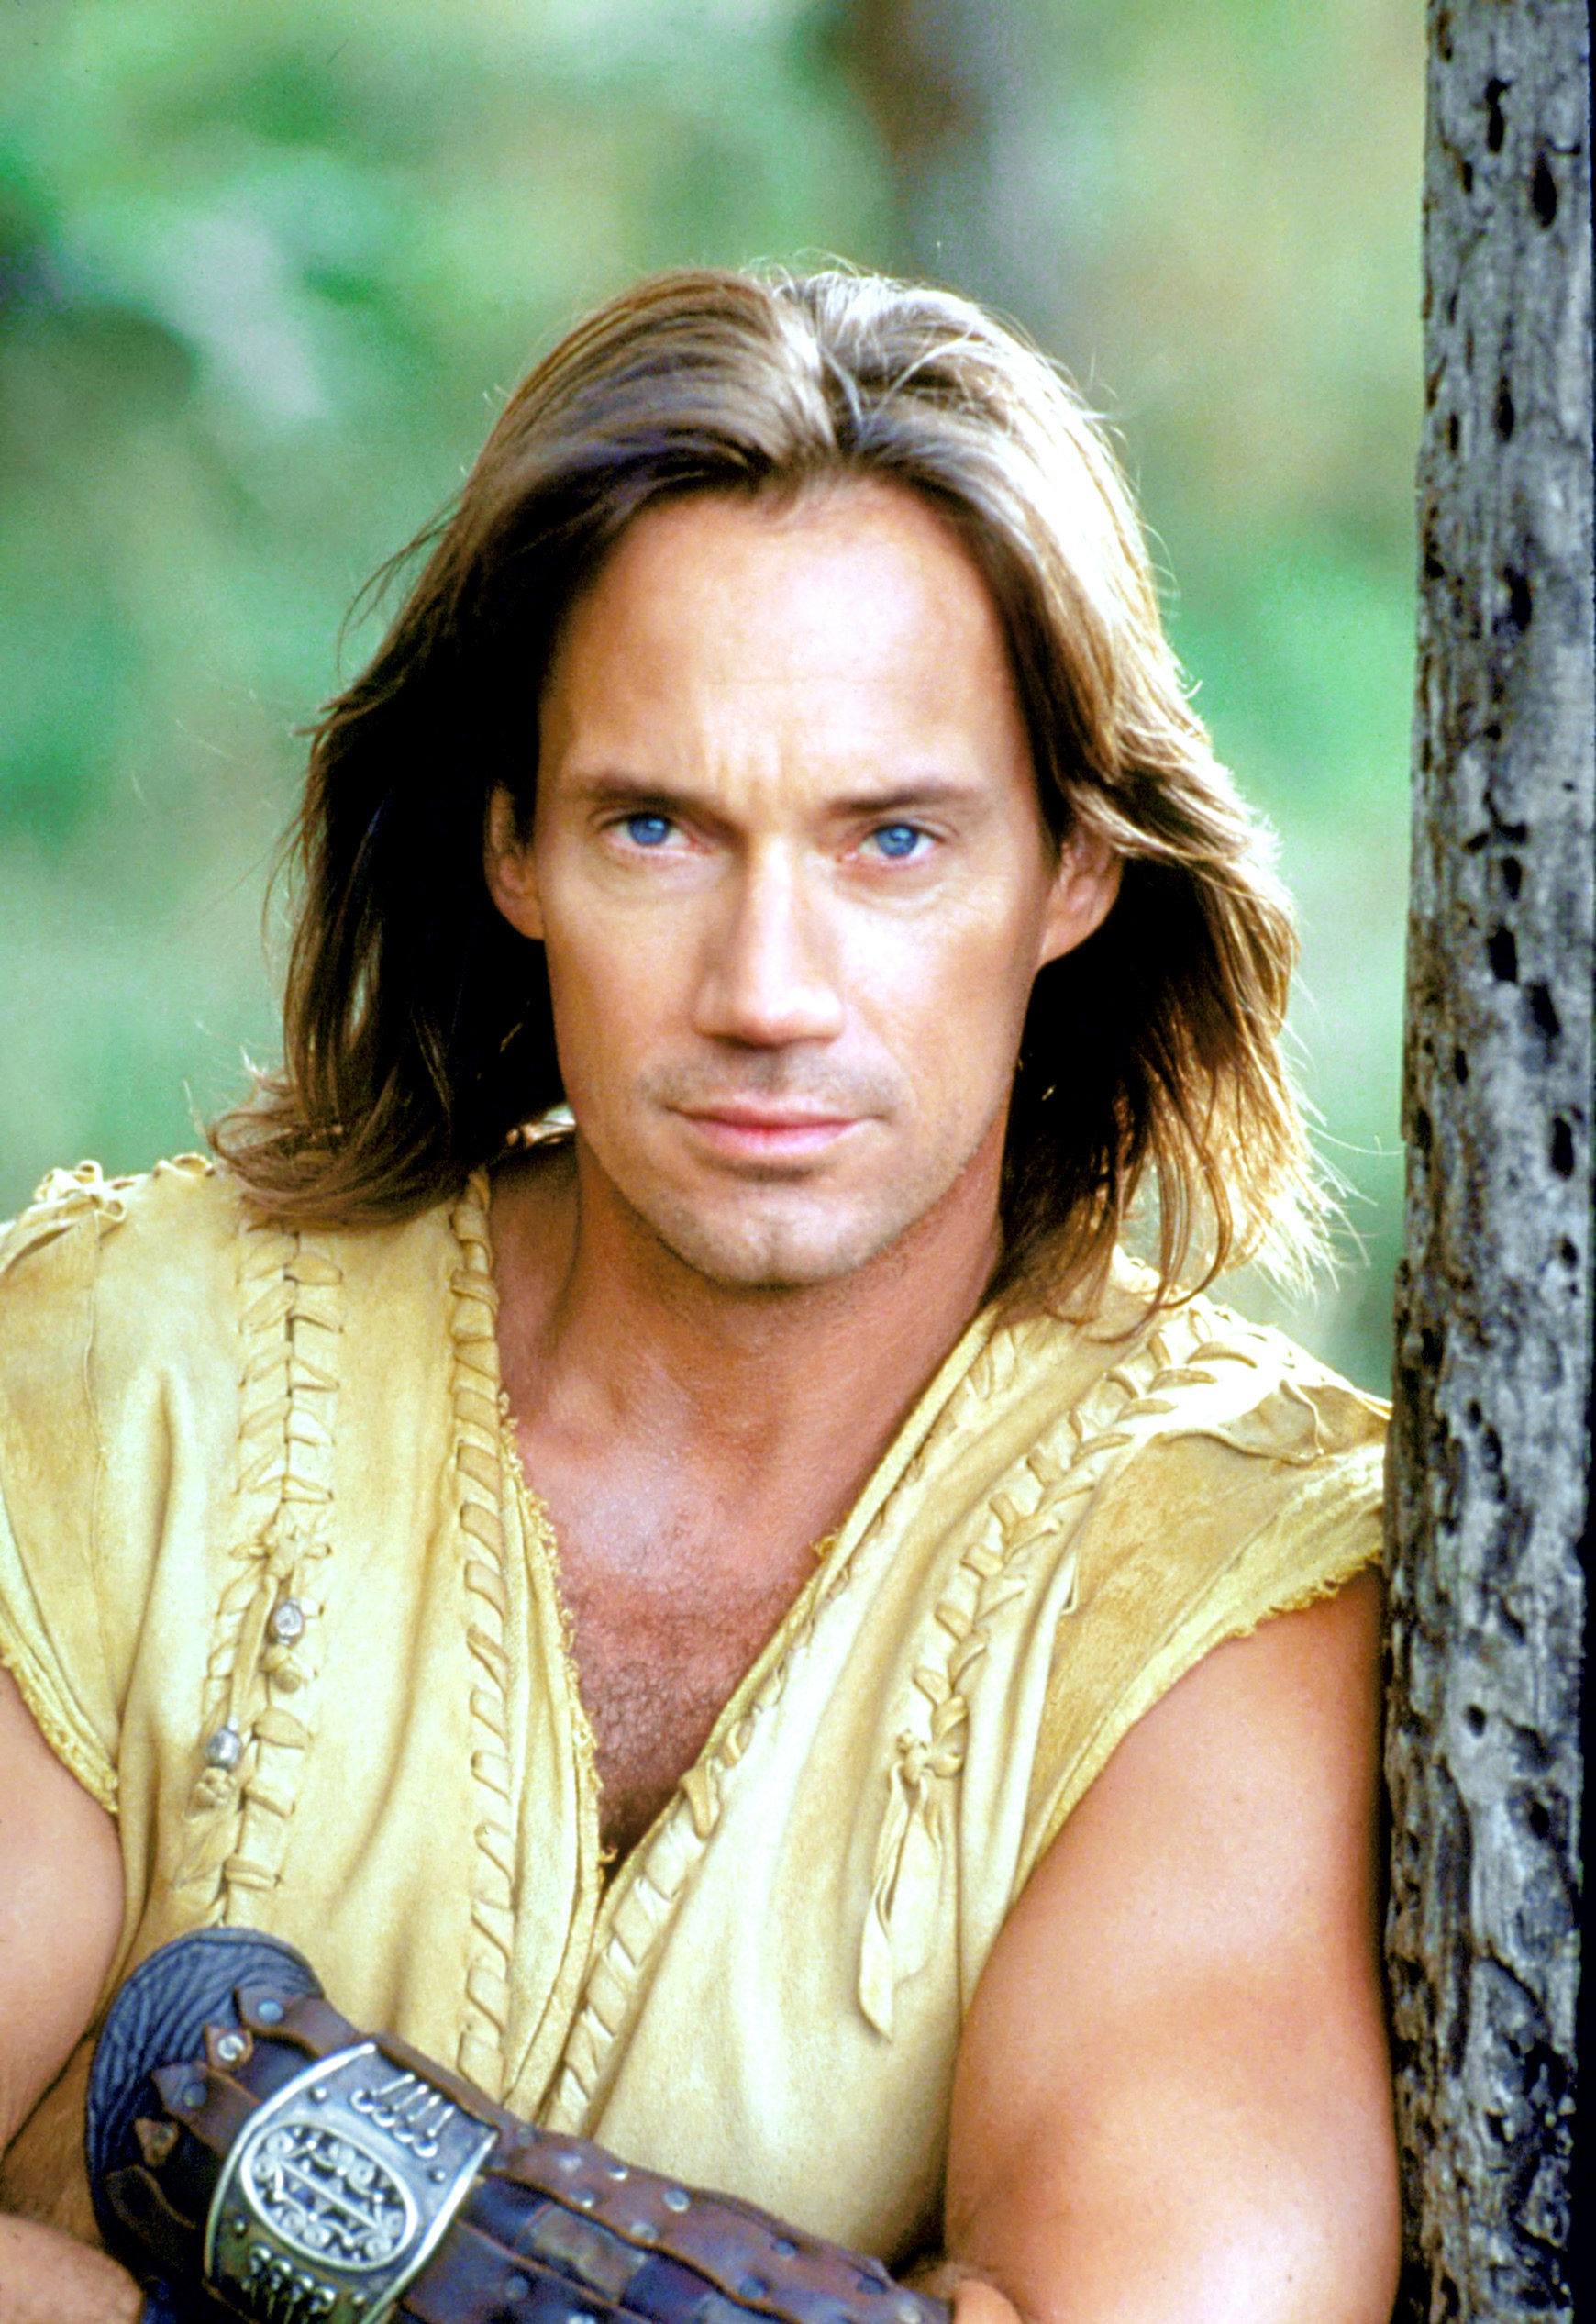 Kevin Sorbo: Hercules: The Legendary Journeys, Action-adventure, Heroic fantasy, Comedy-drama, Christian Williams, Robert Tapert, Ancient Greek Myths, 111 episodes in 6 seasons, 1995-1999. 1740x2540 HD Background.